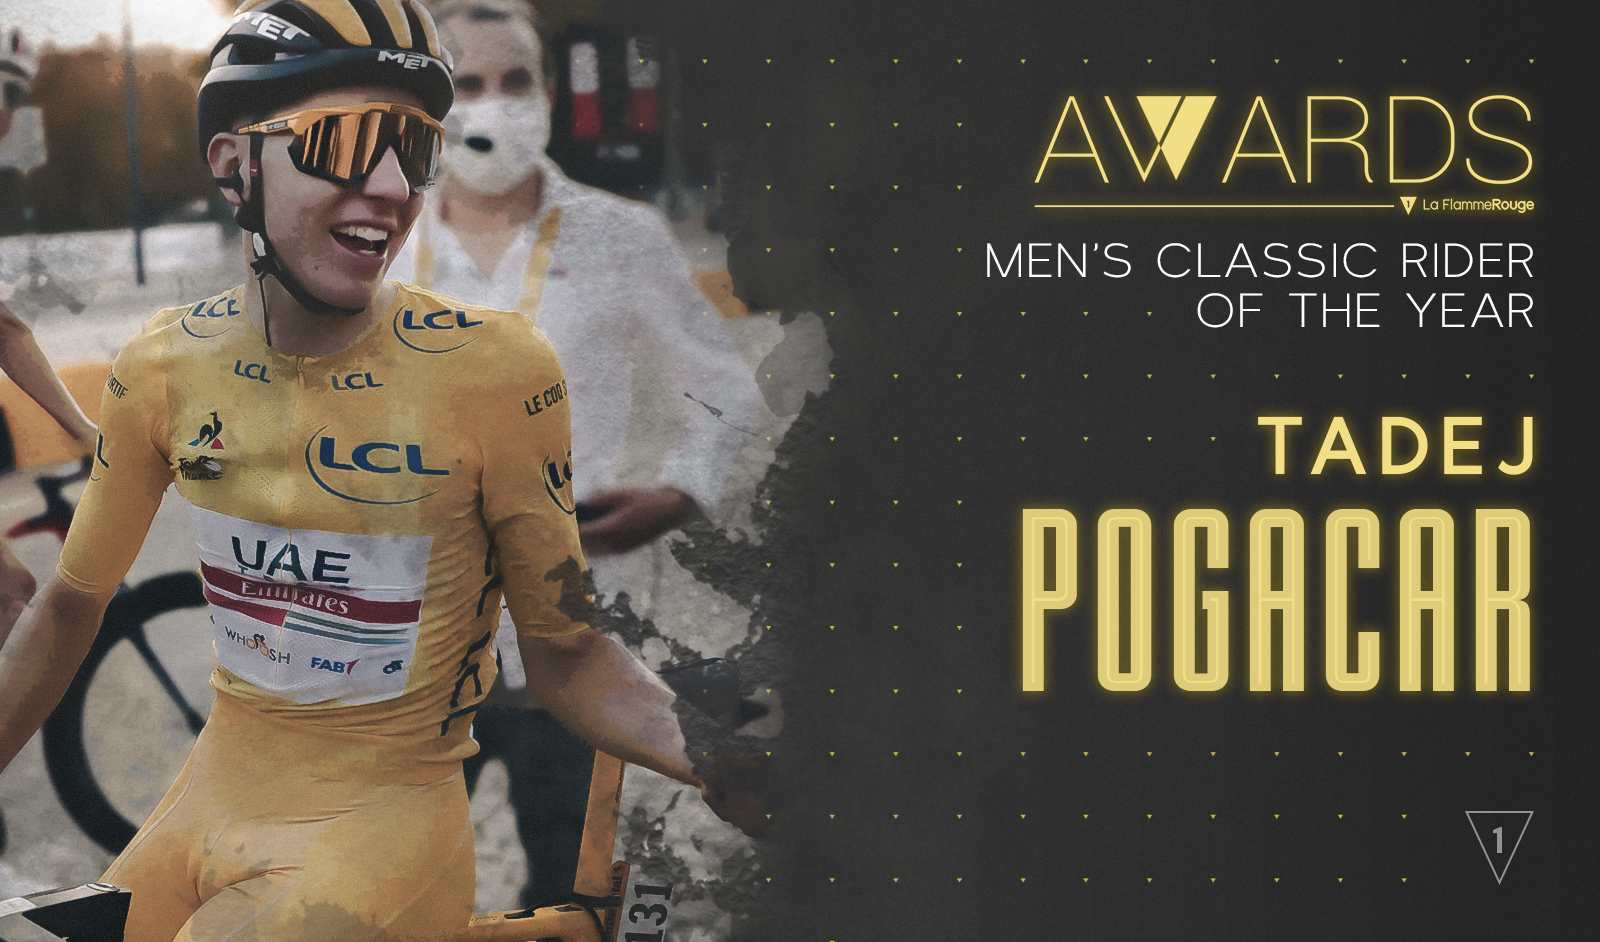 Men’s classic rider of the year